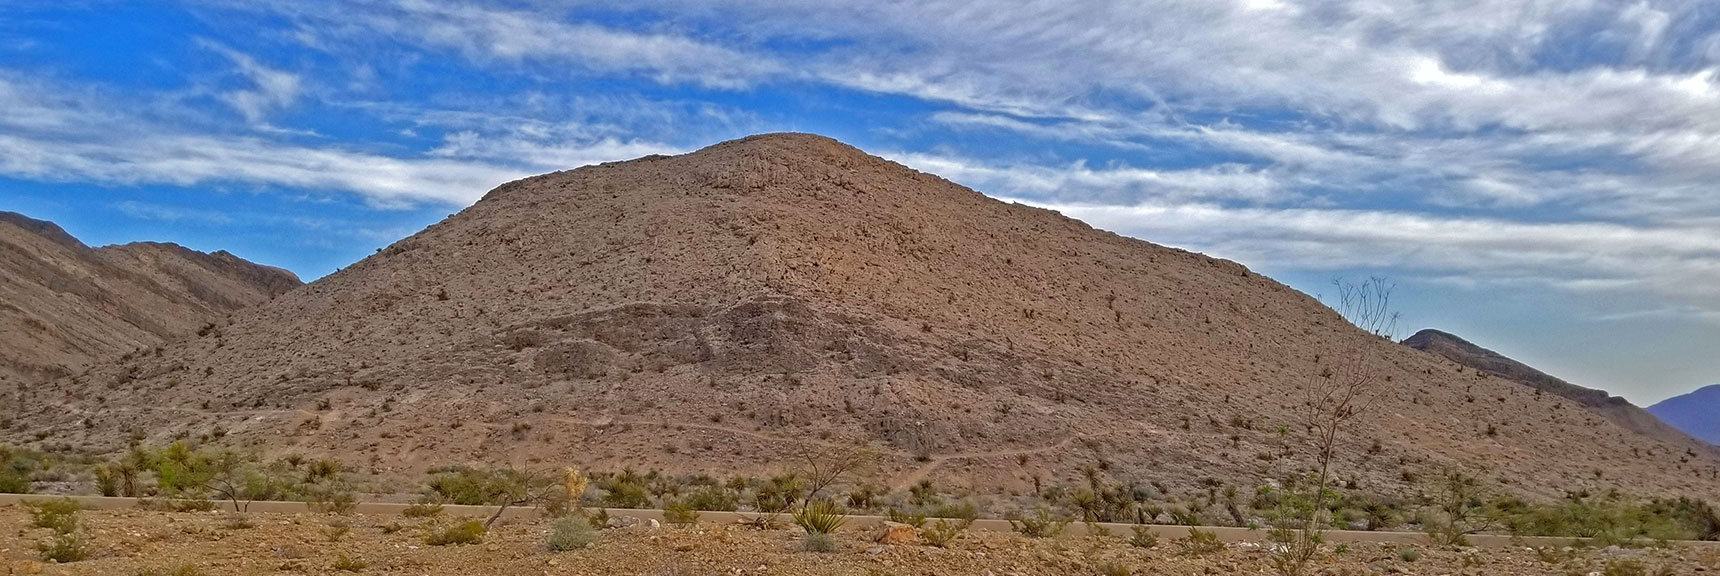 Entrance to Vast Unmarked Trail System at Base of Hill | Little Red Rock Las Vegas, Nevada, Near La Madre Mountains Wilderness